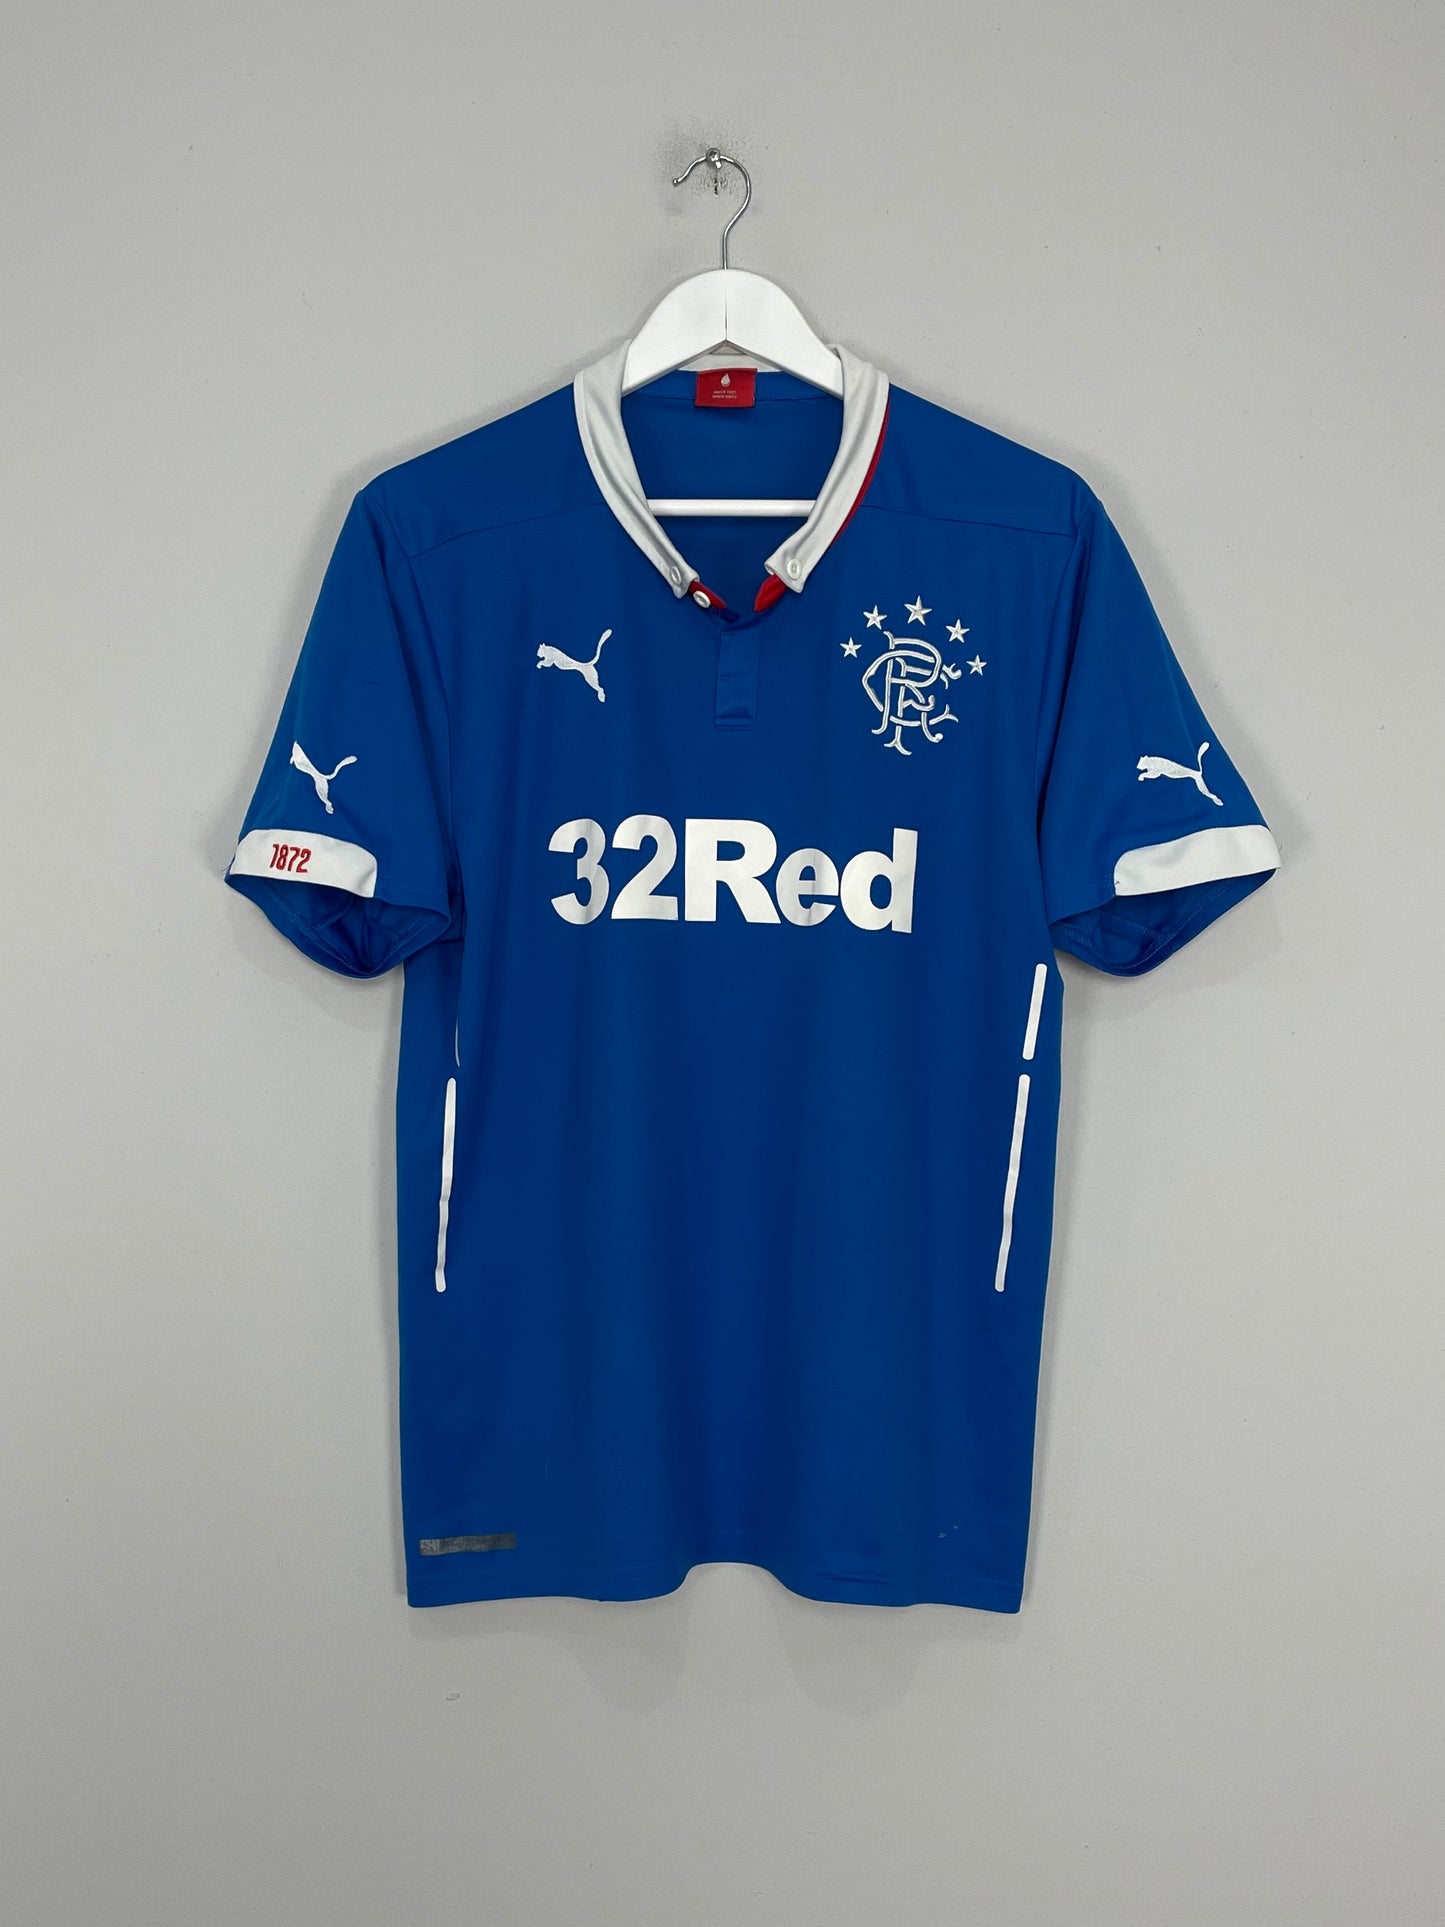 Image of the Rangers shirt from the 2014/15 season